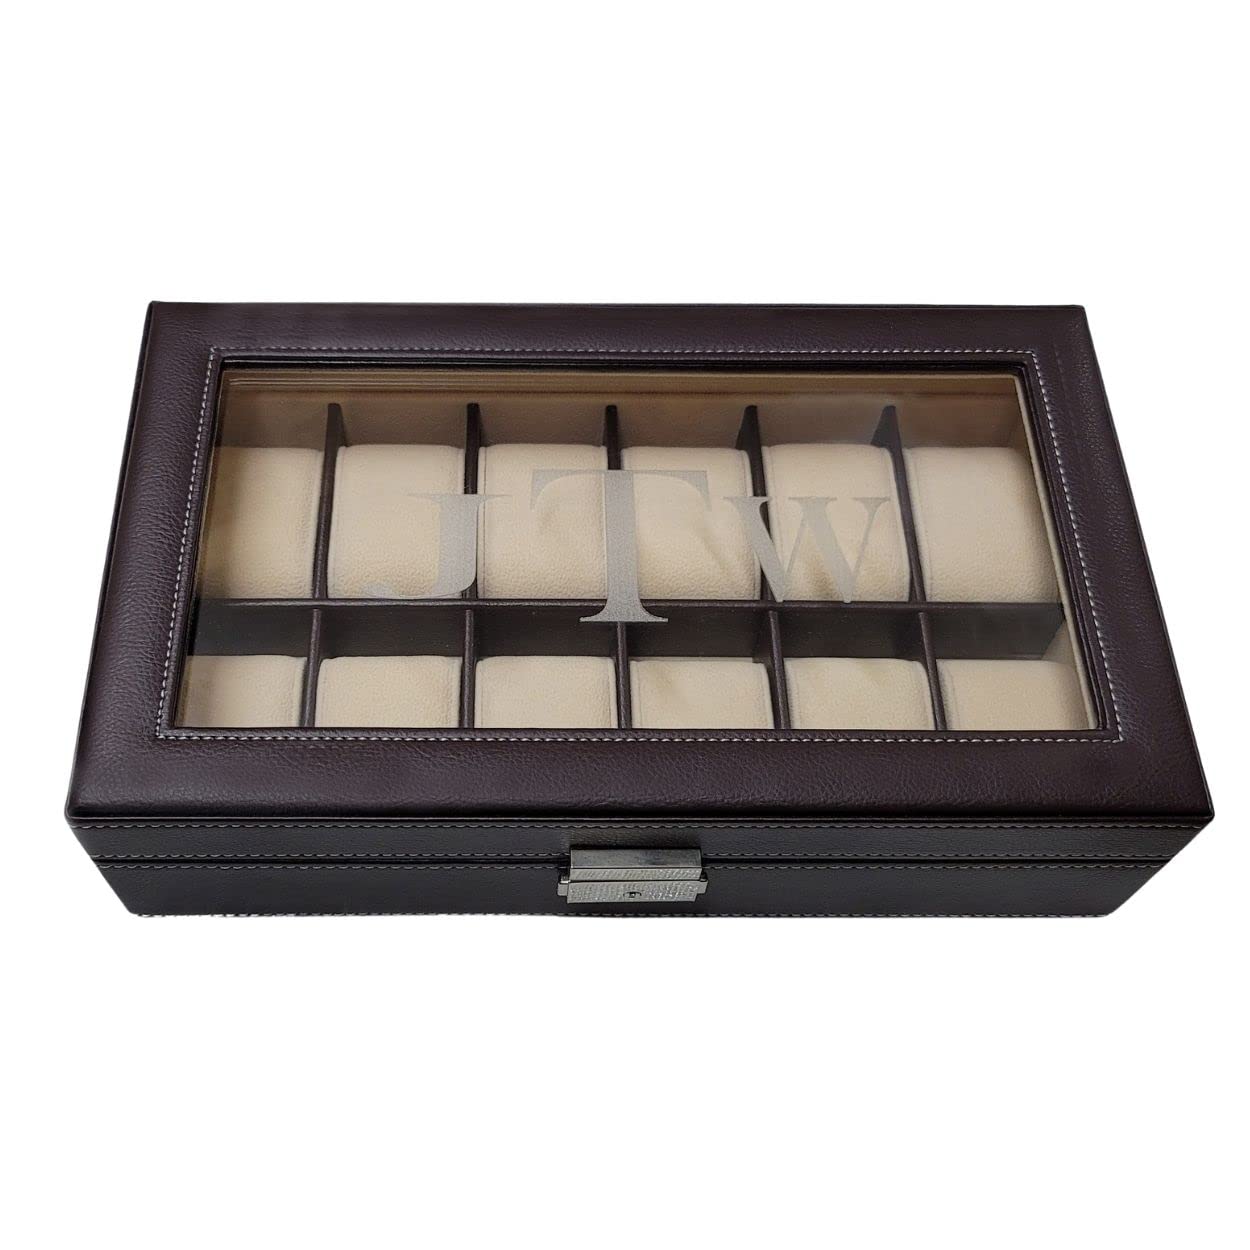 TIMELYBUYS Personalized 12 Slot Chocolate Brown Leatherette Men's Watch Box Display Case Collection Jewelry Box Storage Engraved Glass Top